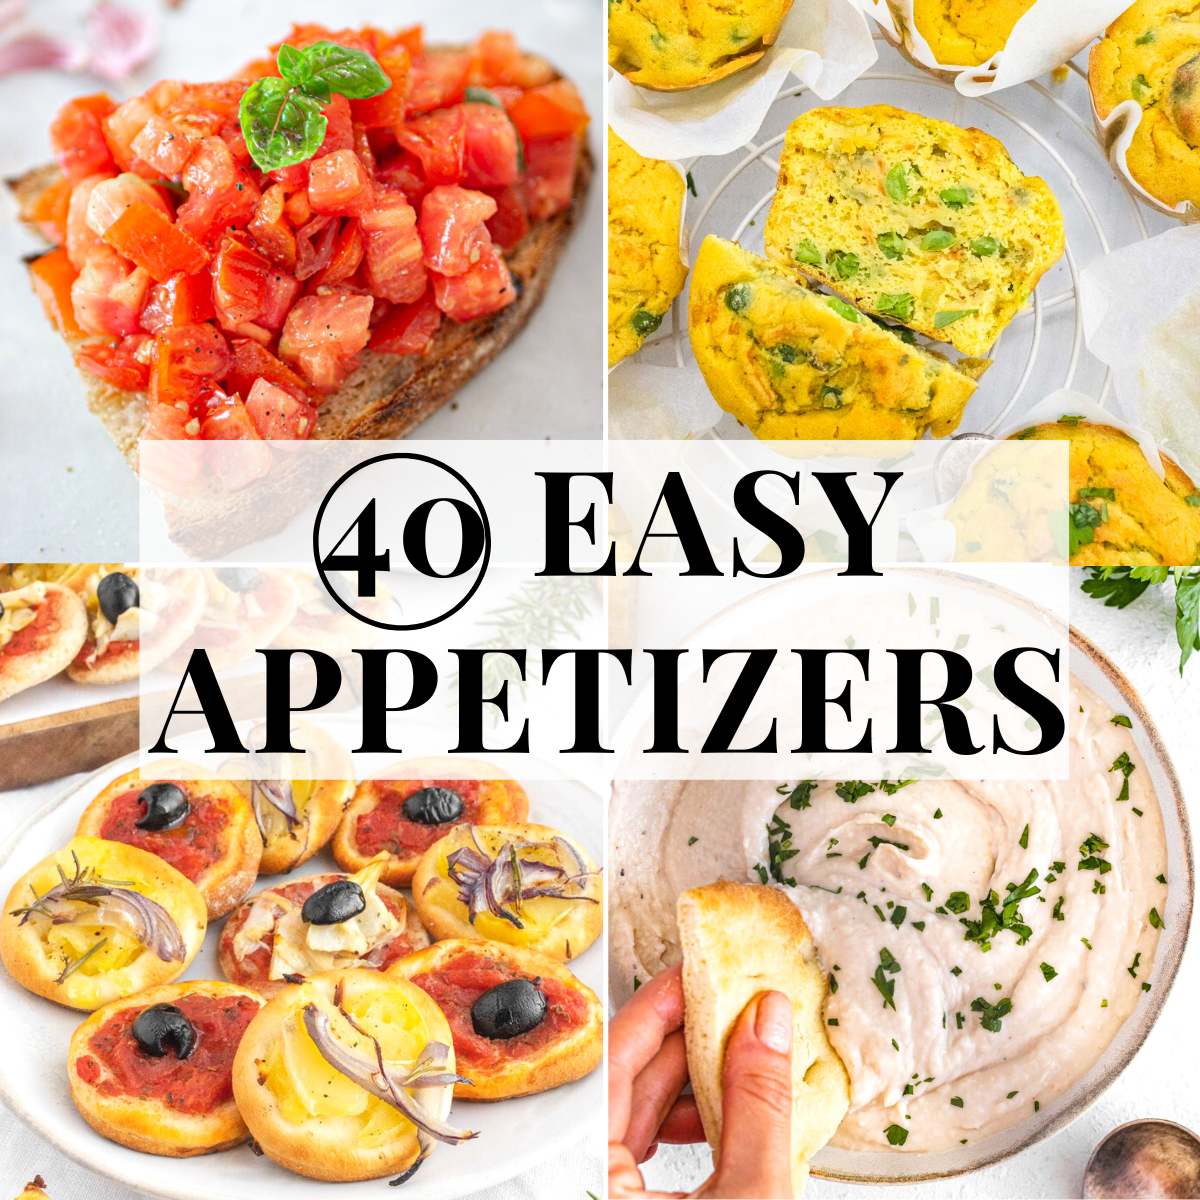 Easy appetizers with mini pizza and dips